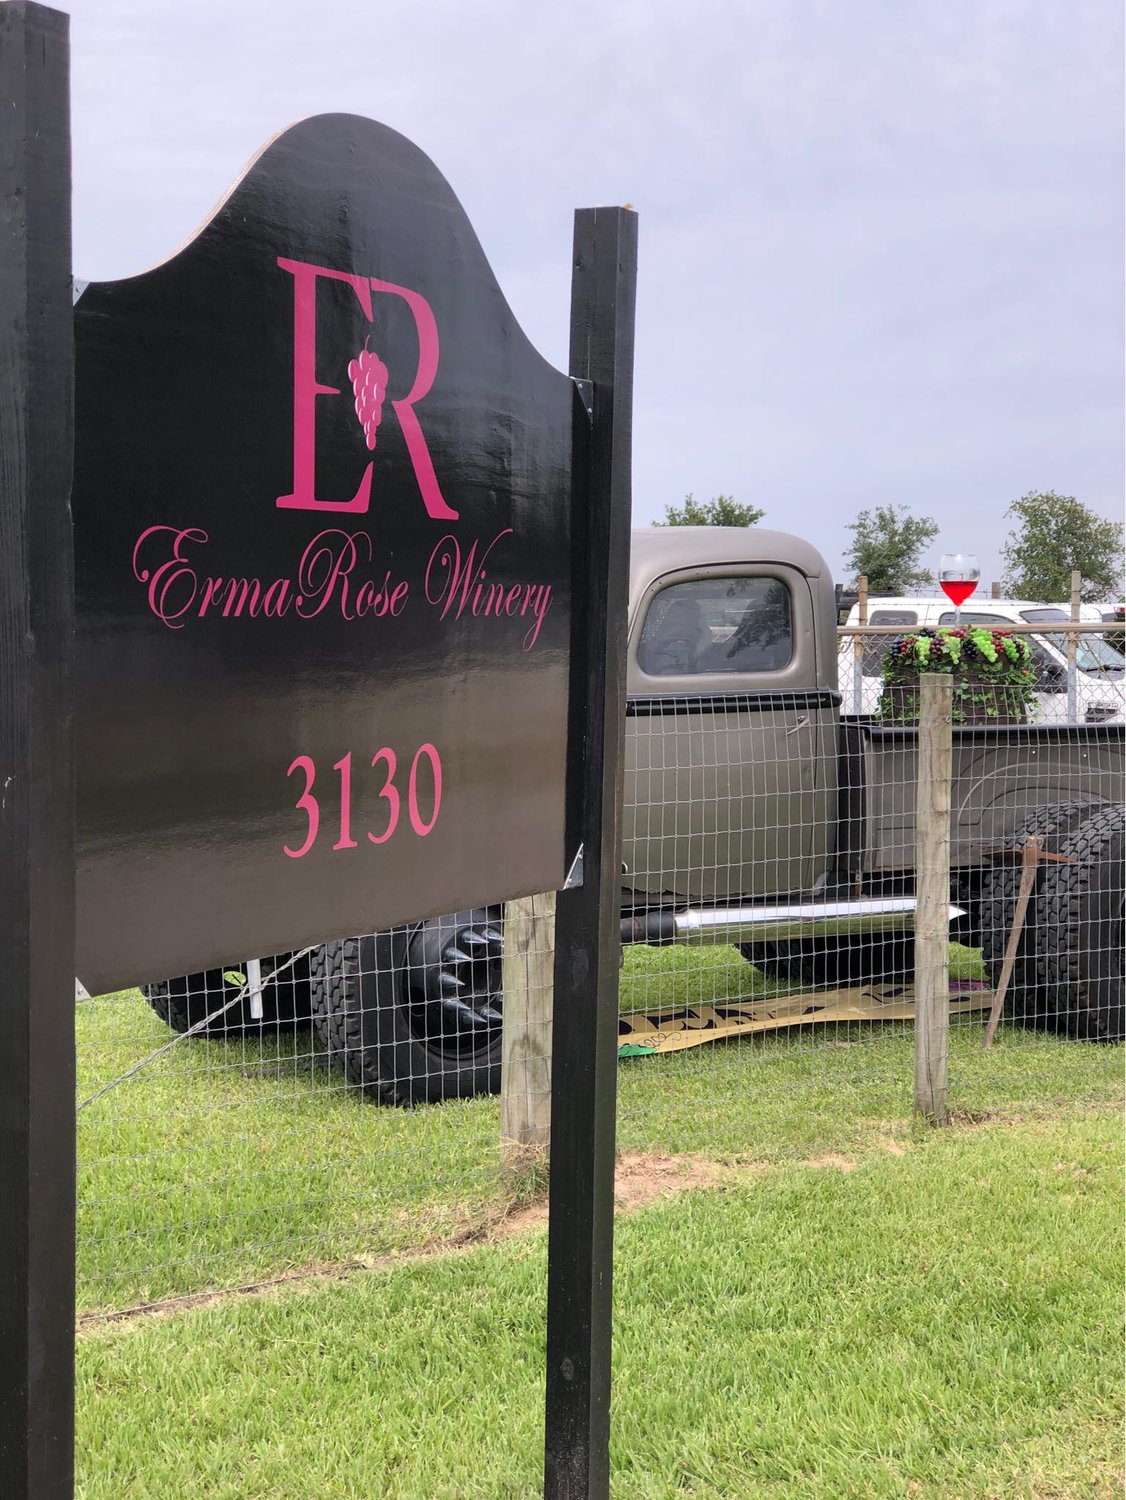 ErmaRose Winery is located just off Katy Hockley Cutoff Road next to a ranch and hosts two other family-owned businesses: Texas Sno and Daddy Duncan's BBQ. See the Texas Sno article for more information on a place to cool off locally.